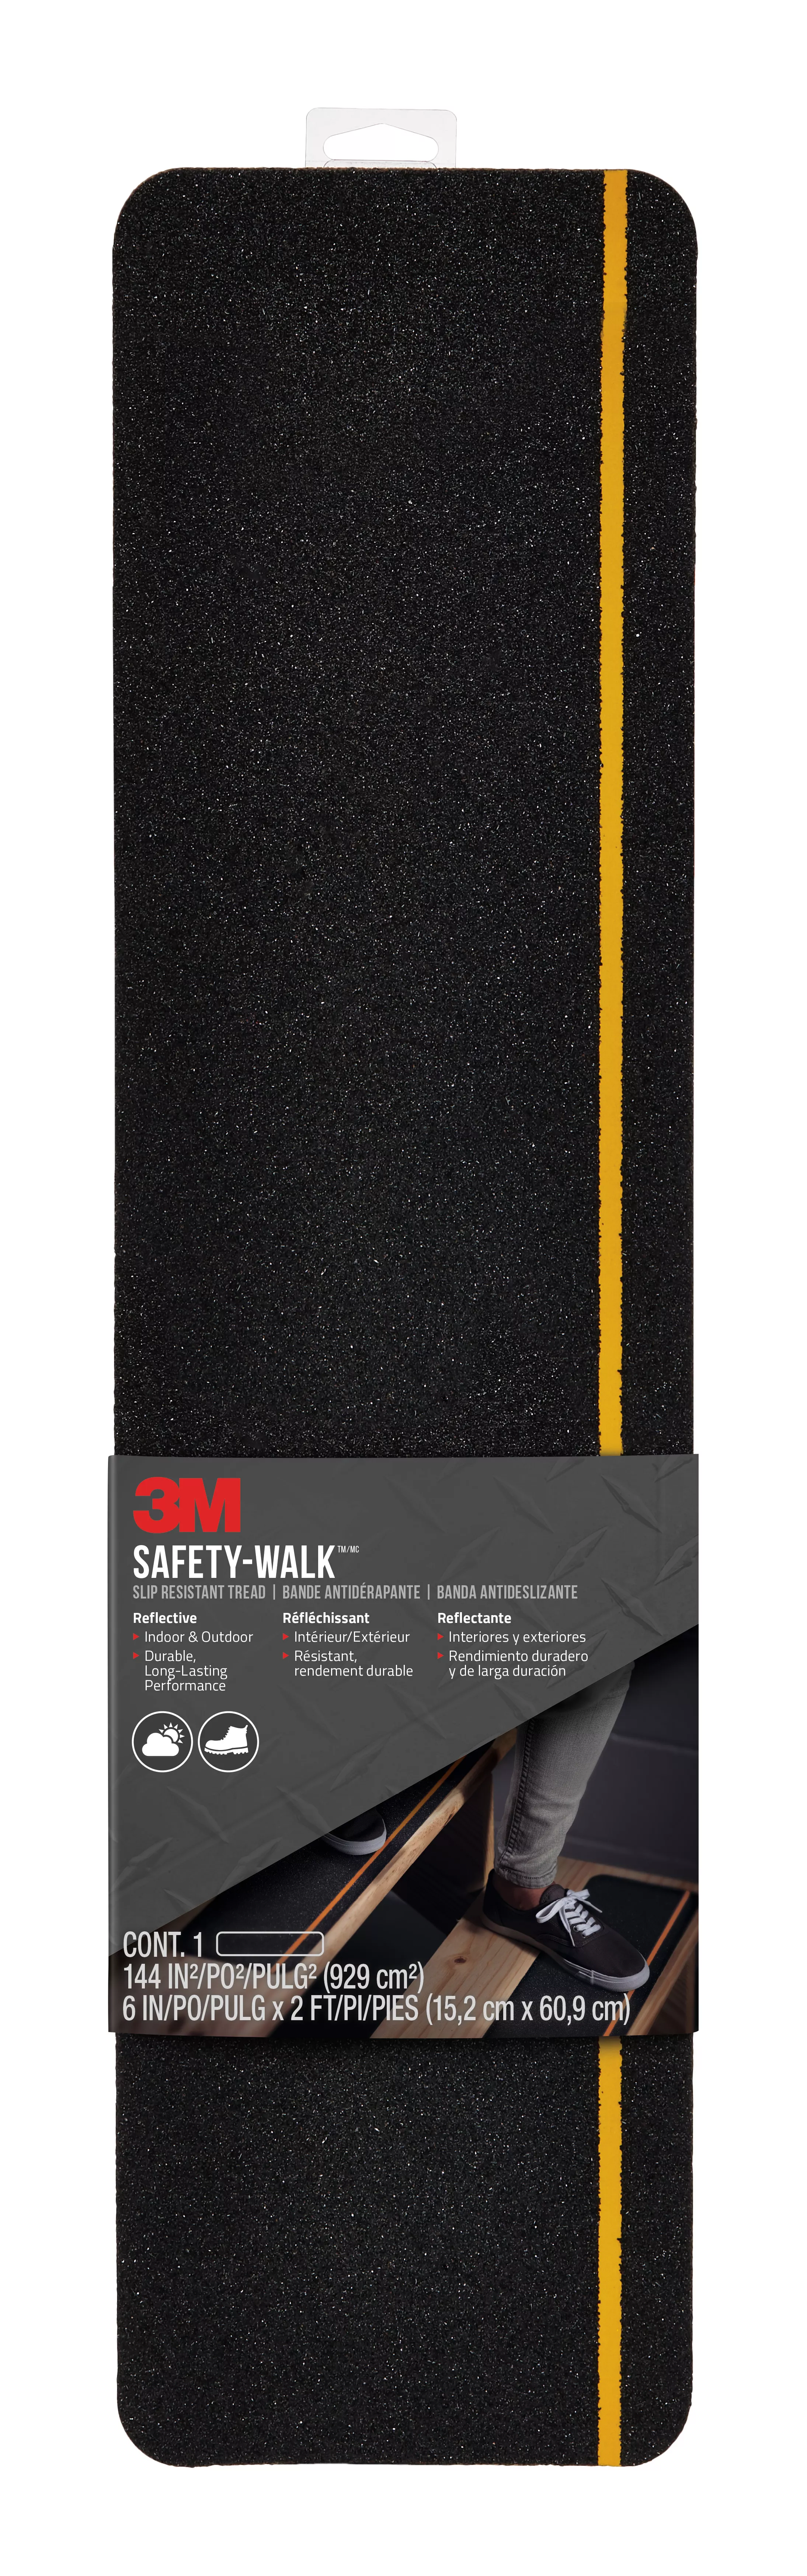 3M™ Safety-Walk™ Slip Resistant Reflective Tread, 600BY-T6X24, 6 in x 2
ft, Black